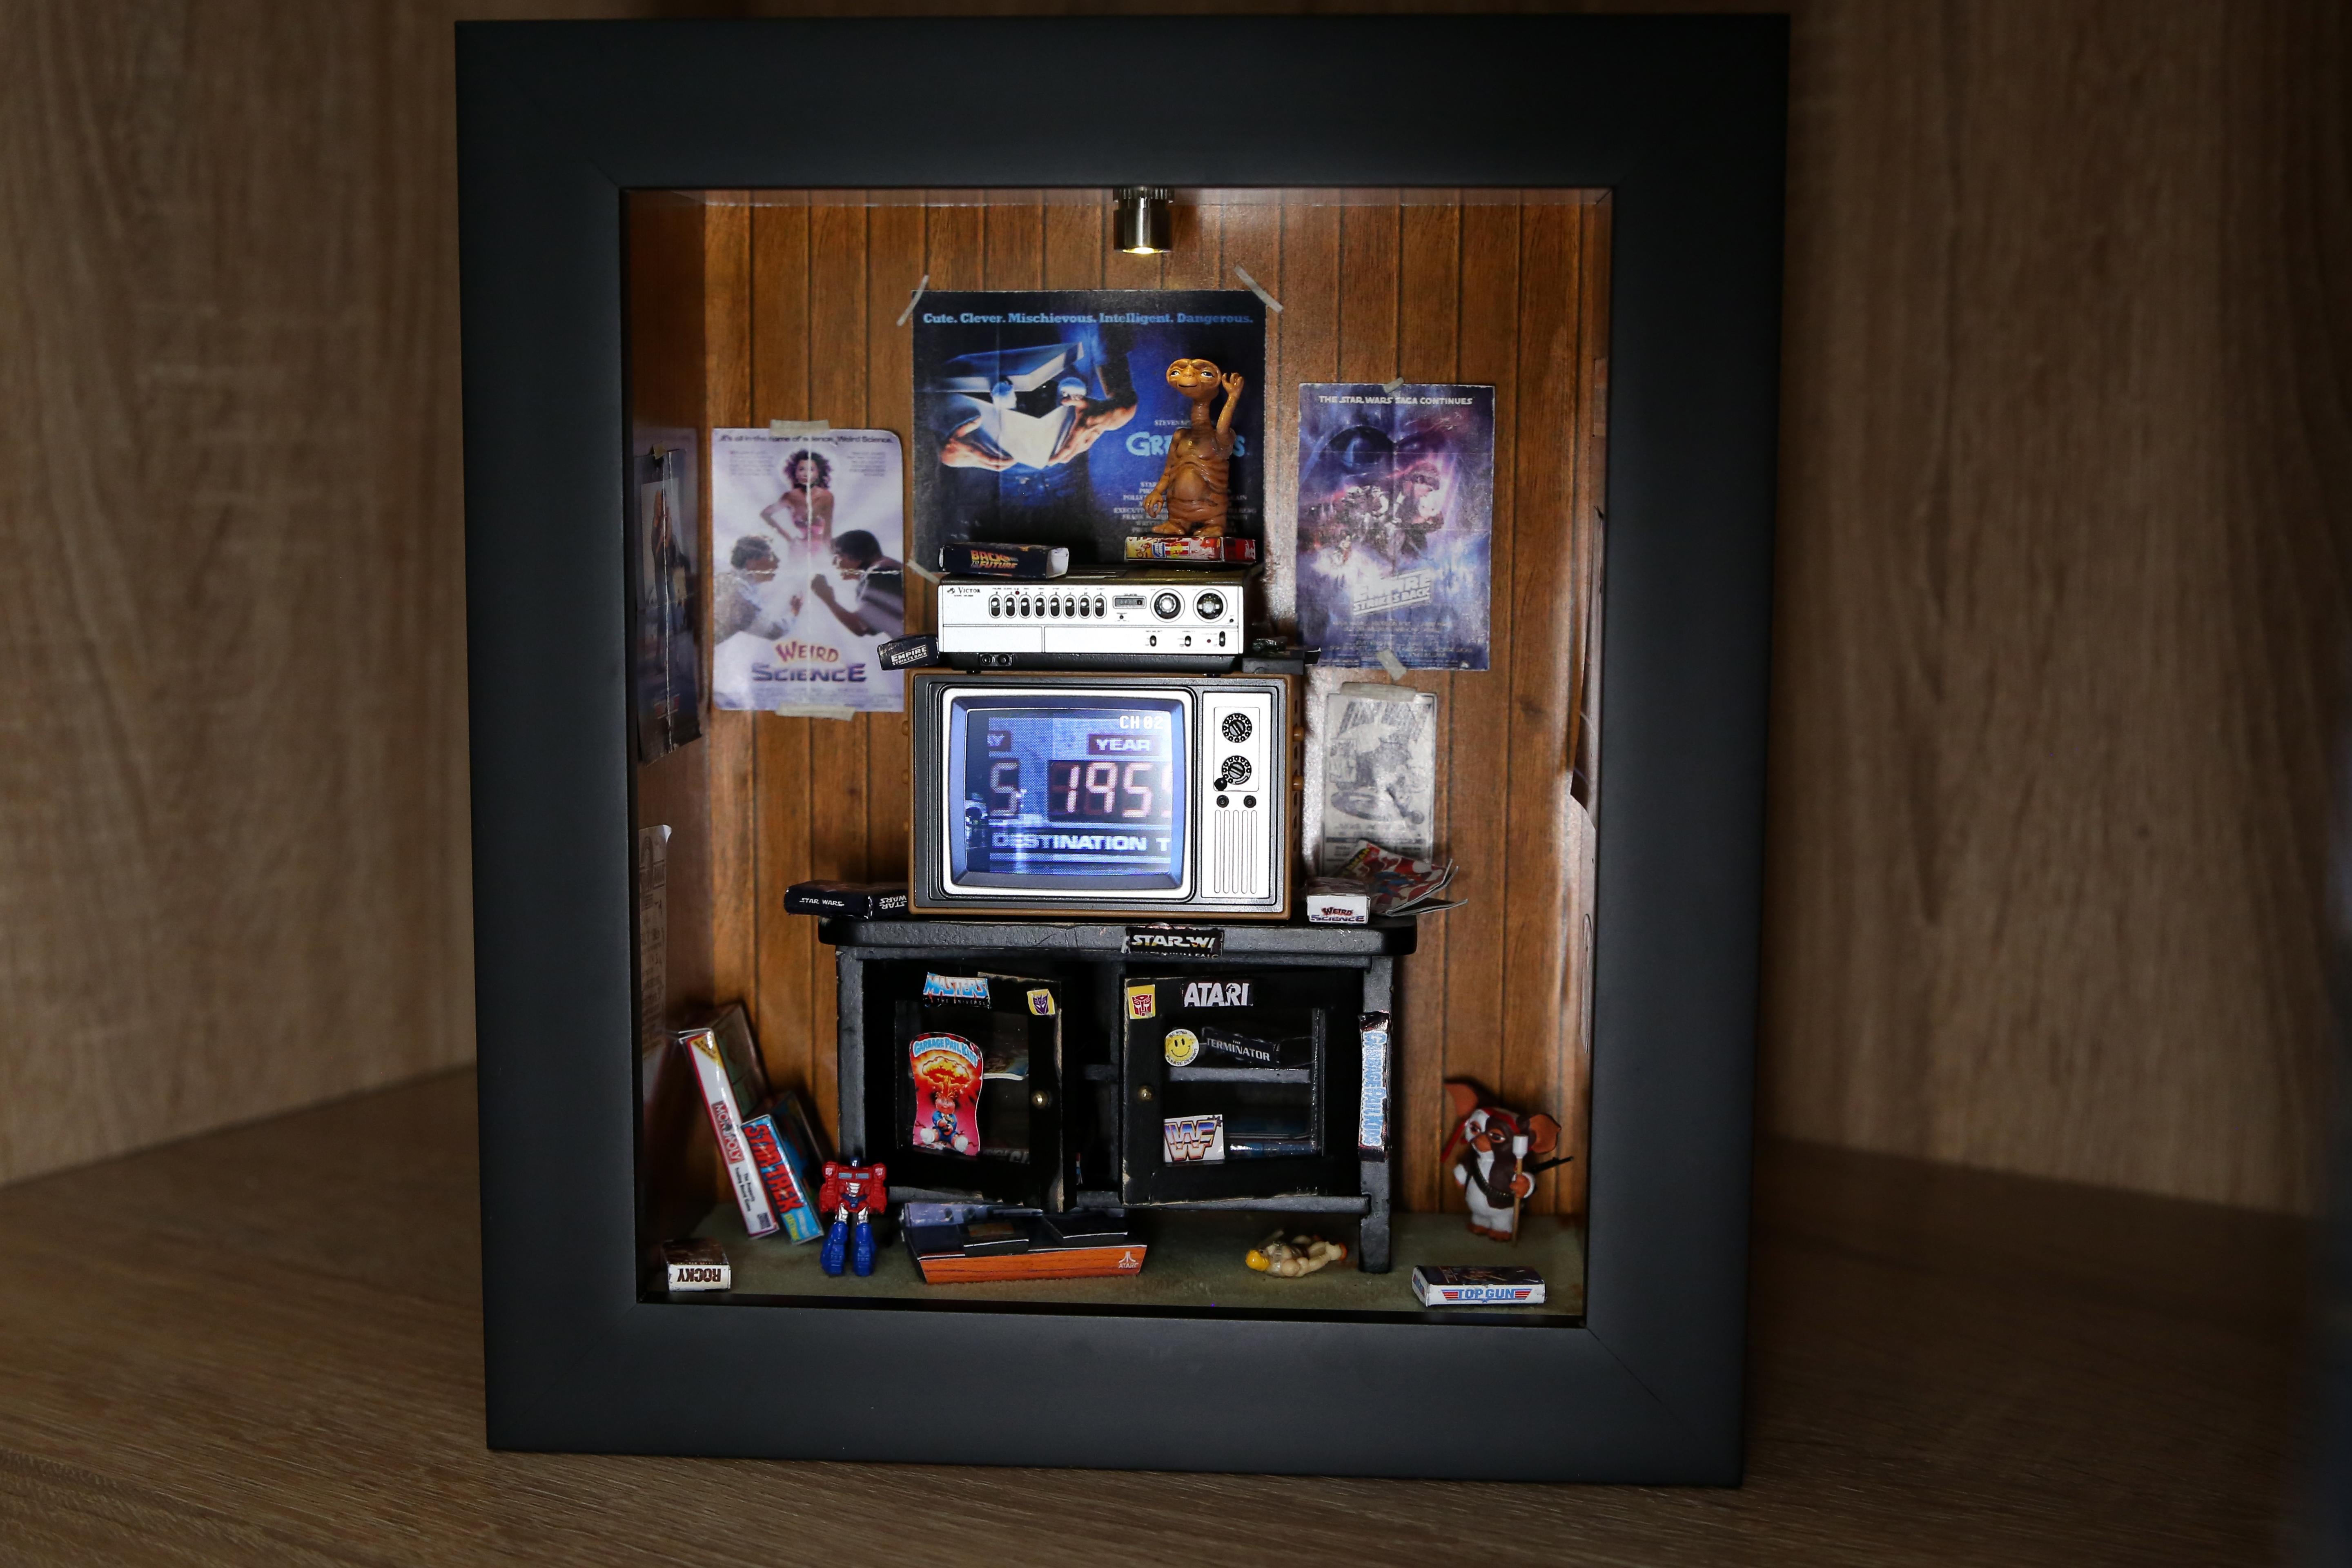 MINIATURE GEN X ROOM CASE STUDY -001-PG-13
Transport yourself back to 1988 with this handmade room box featuring:
-Working T.V. w remote playing movie clips from Back to the Future (licensed by Universal)
-Handmade 80's movie posters. Distressed by